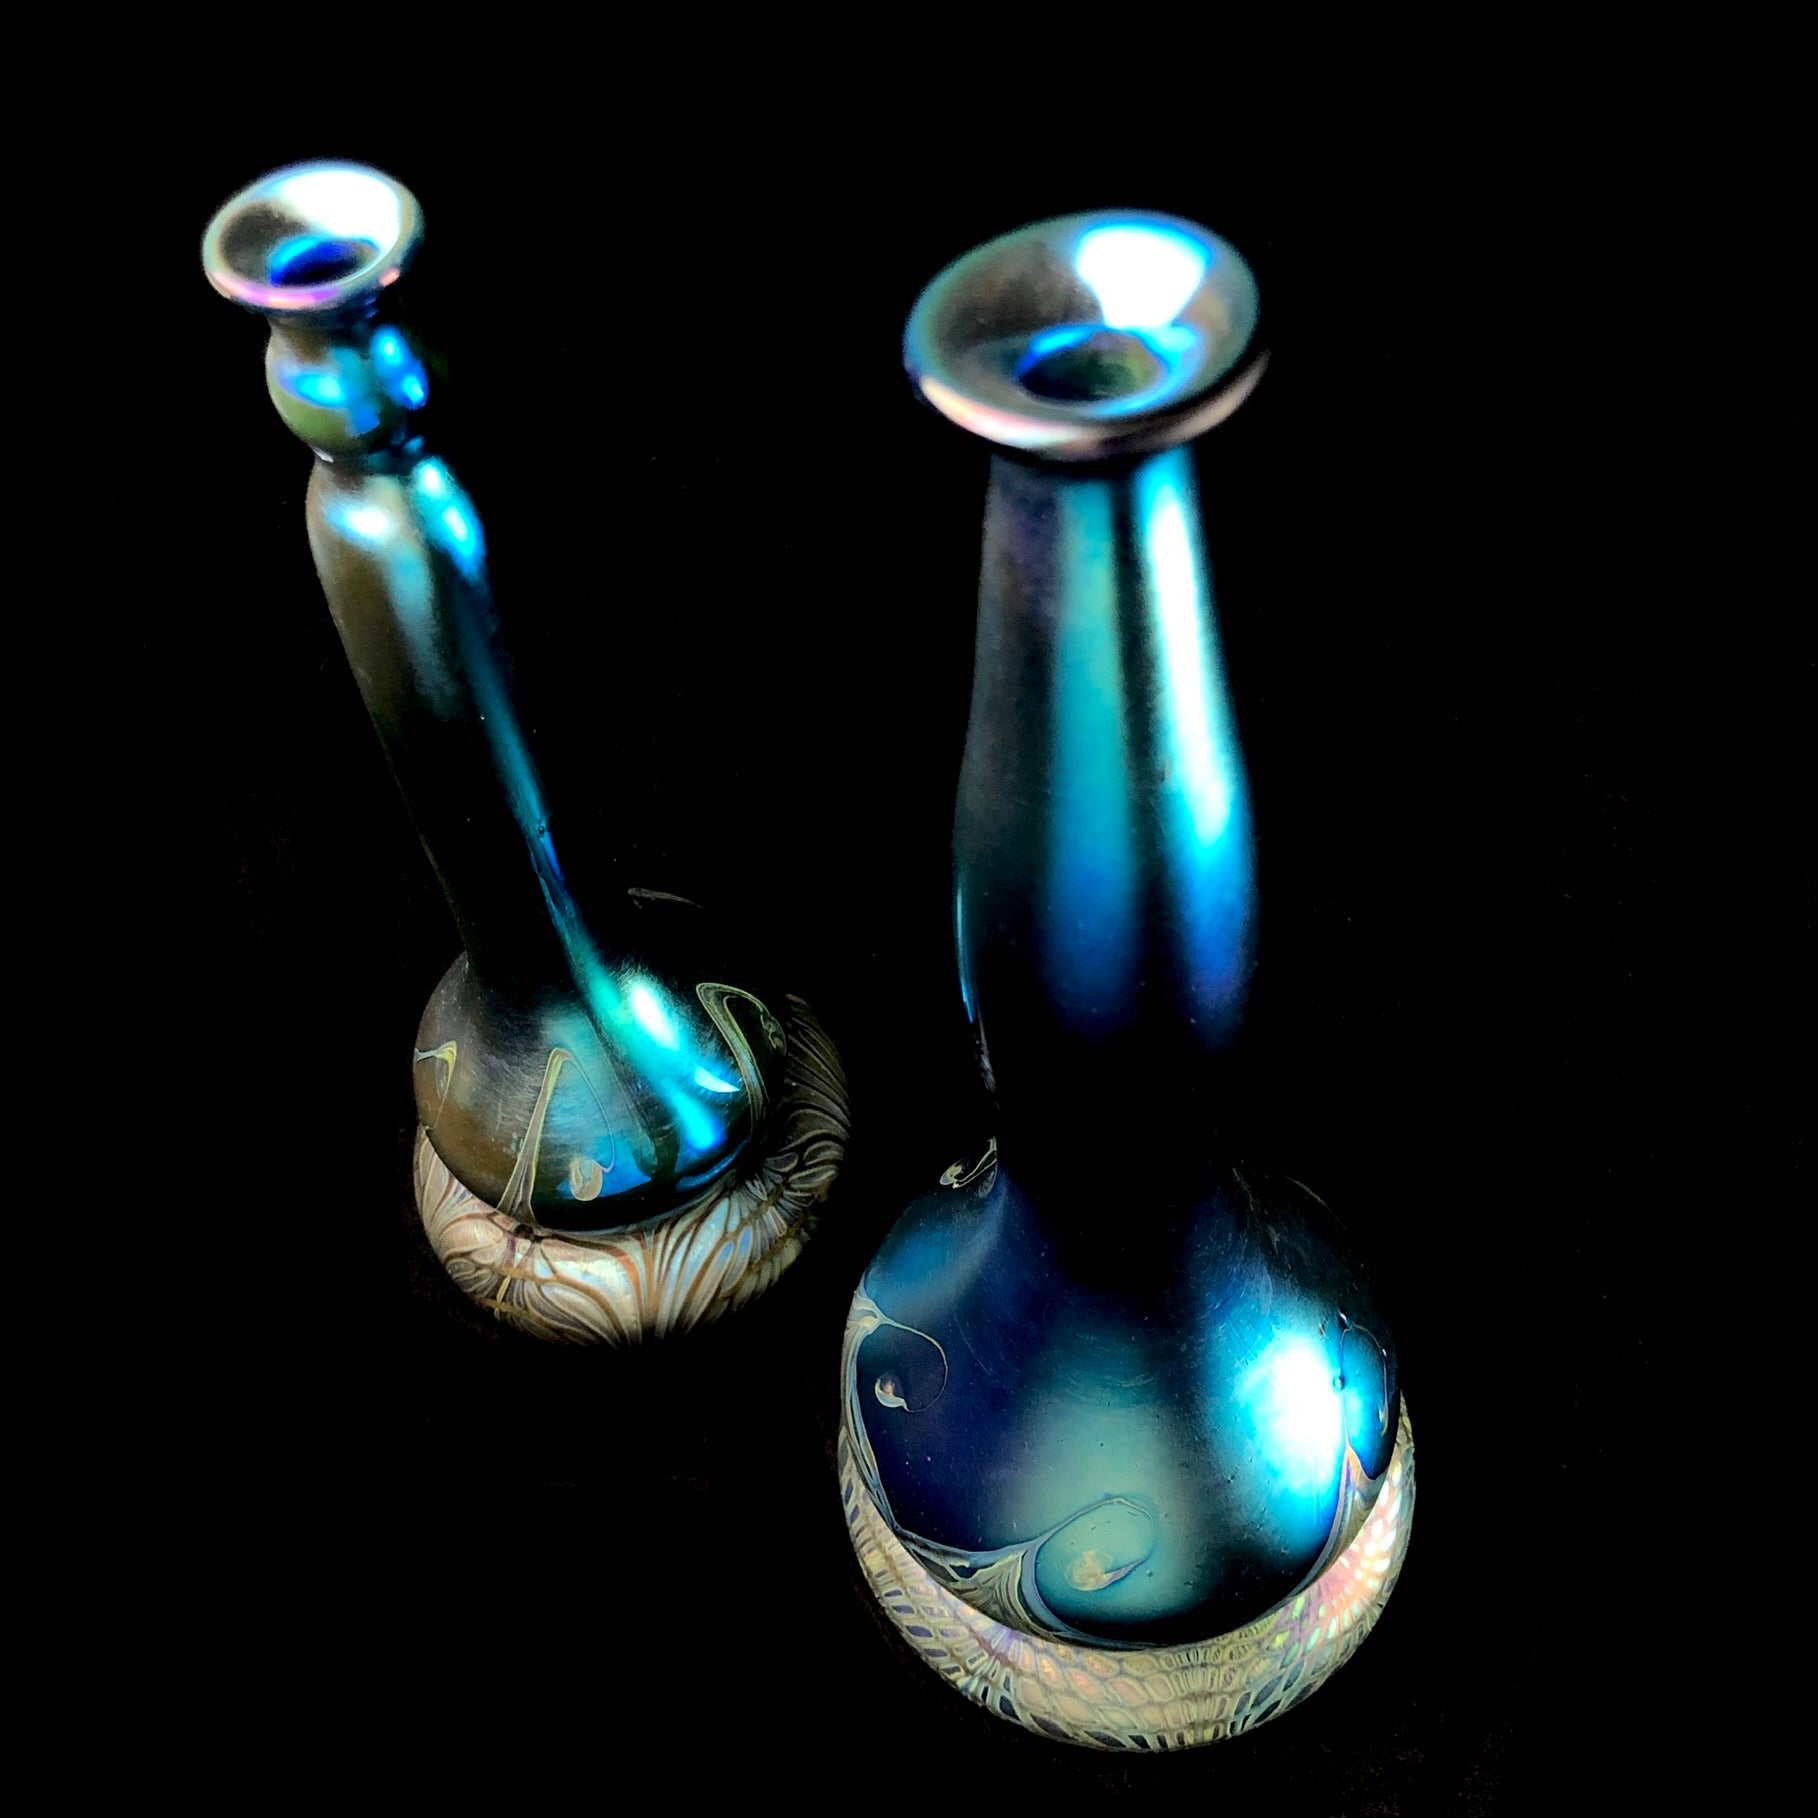 Top view of Lipped Bottle Vases focussing on blue color and feather pattern of glass on base of vases